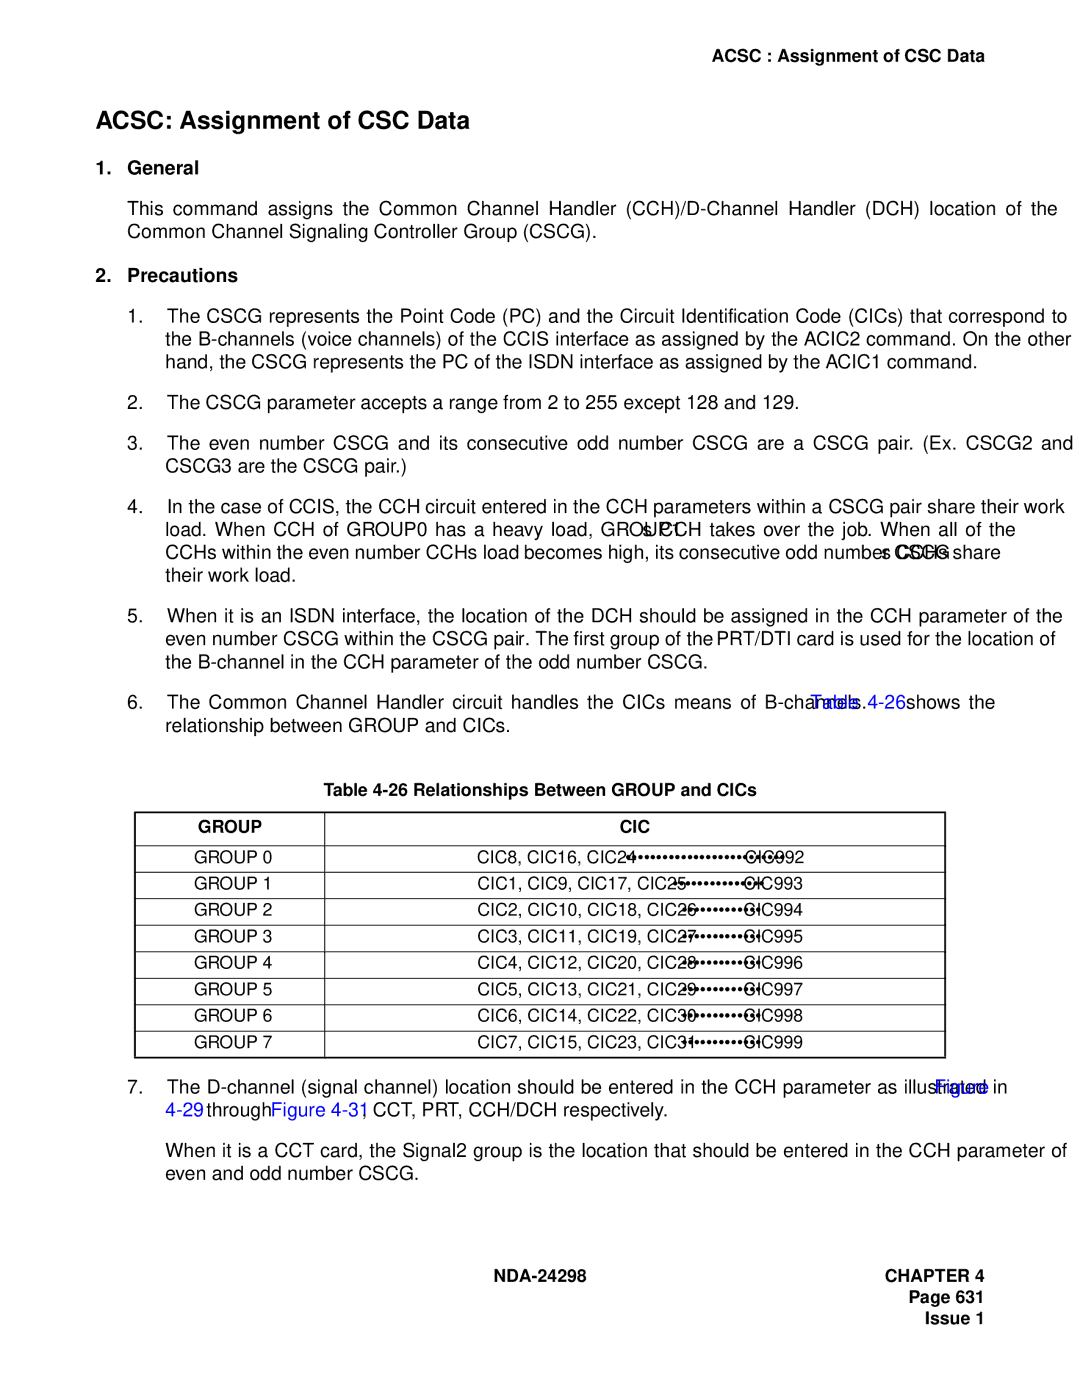 NEC NDA-24298 manual Acsc Assignment of CSC Data, Relationships Between Group and CICs, Group CIC 